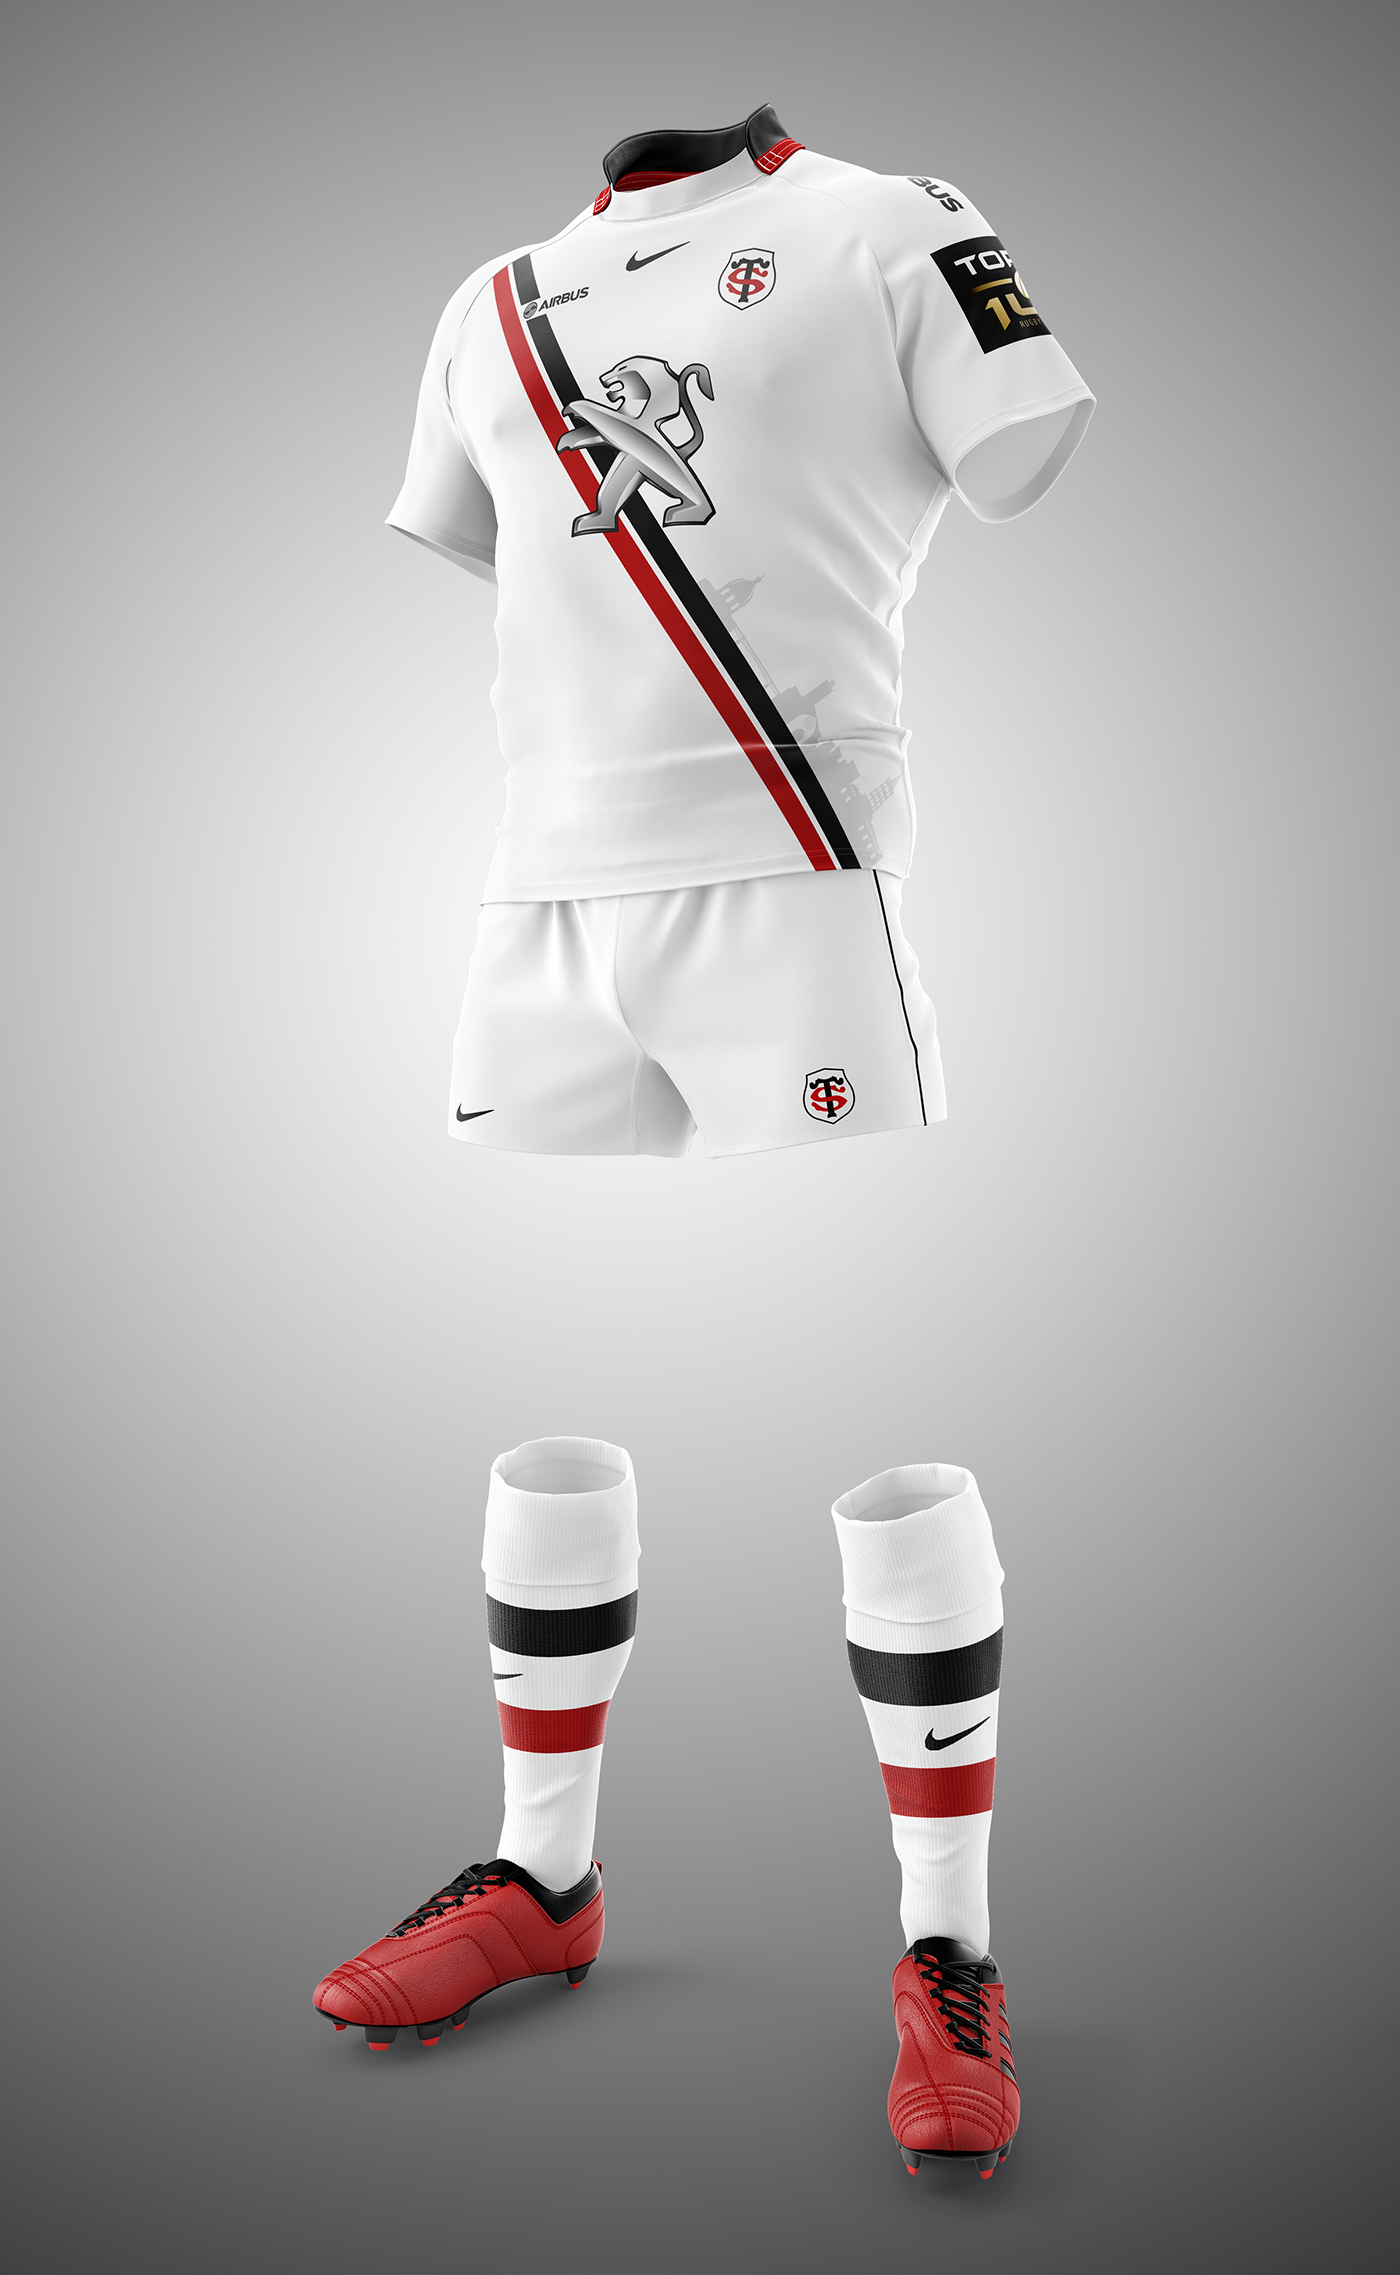 Nike Rugby toulousain stade ilavcor france PEUGEOT